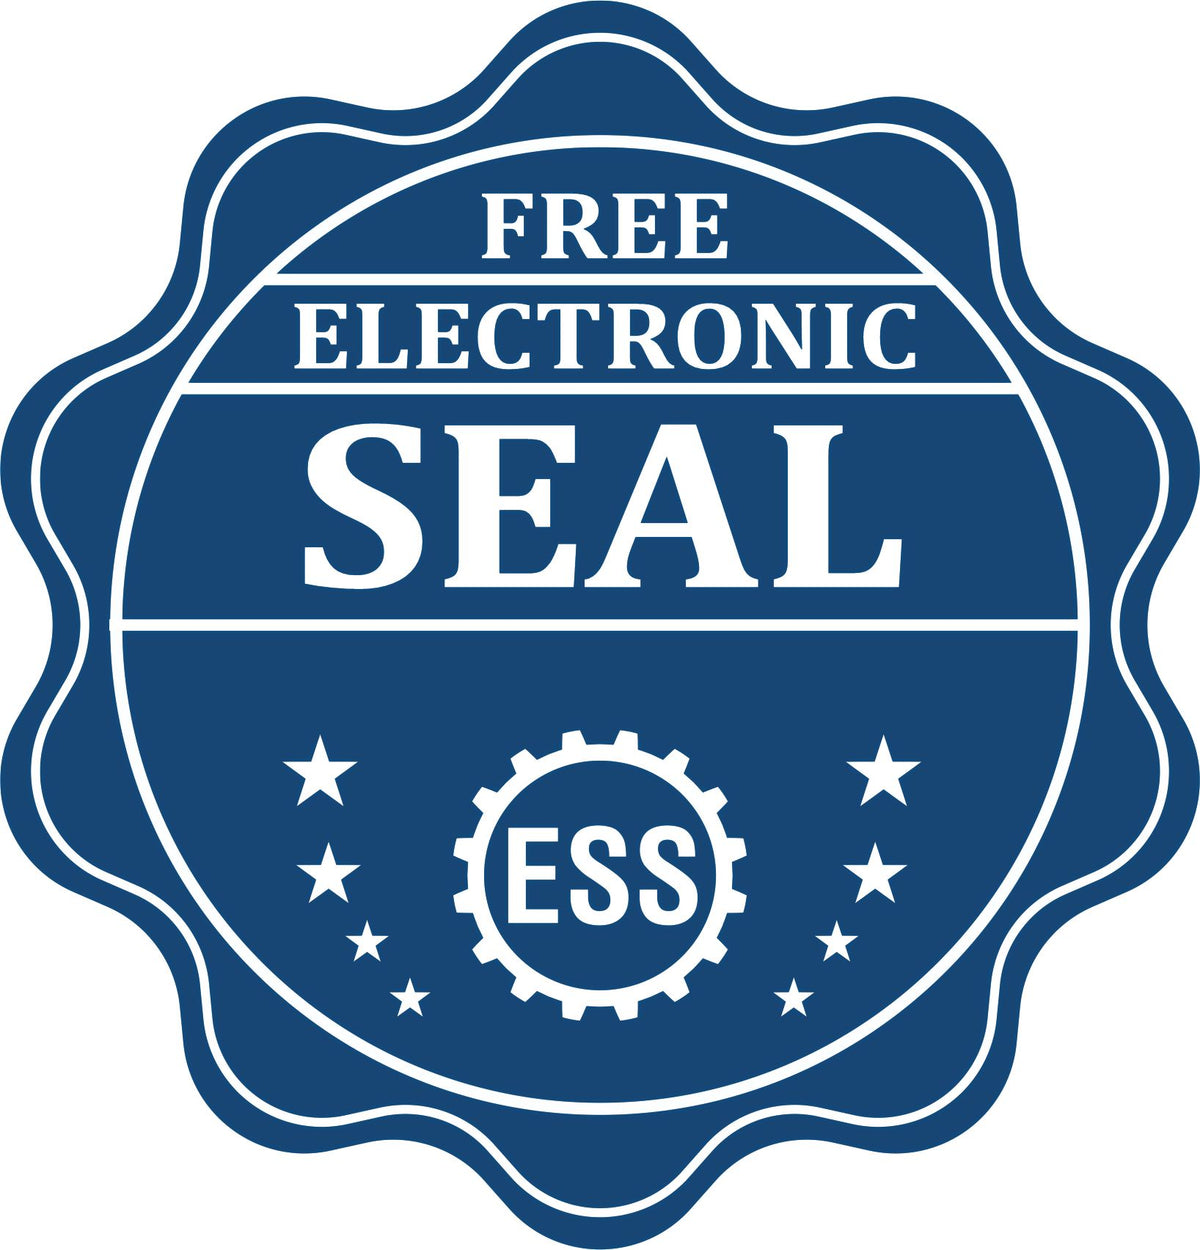 A badge showing a free electronic seal for the State of North Carolina Soft Land Surveyor Embossing Seal with stars and the ESS gear on the emblem.